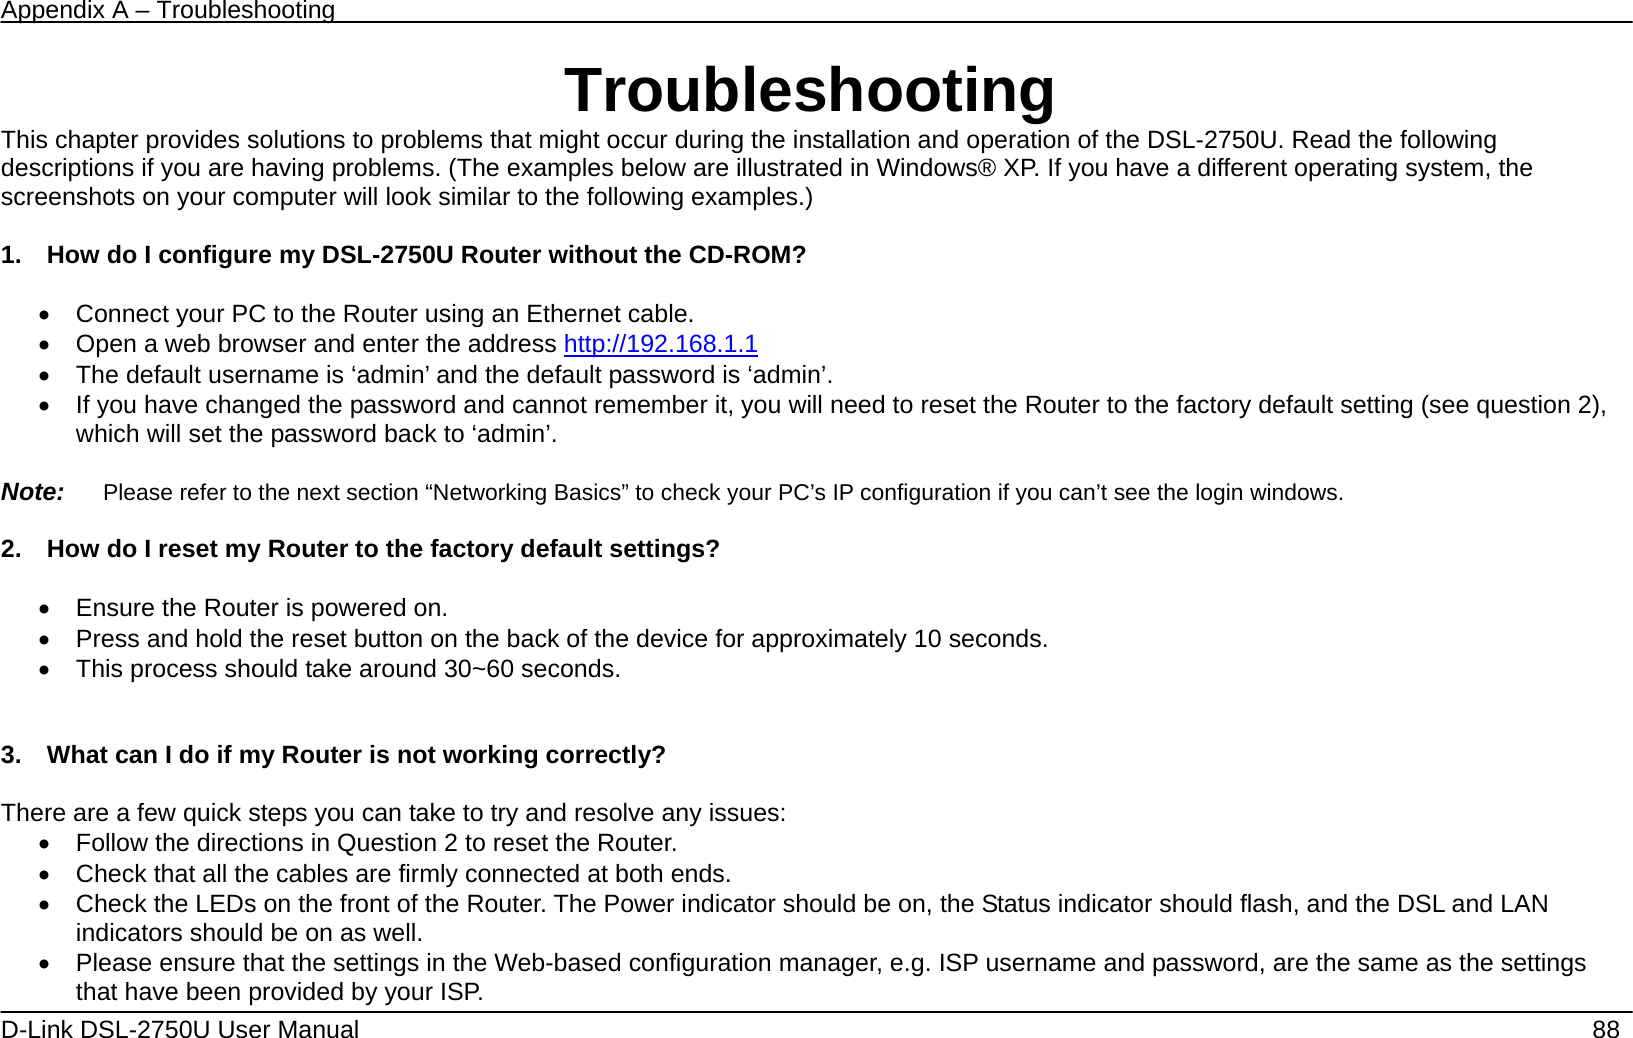 Appendix A – Troubleshooting   D-Link DSL-2750U User Manual    88 Troubleshooting This chapter provides solutions to problems that might occur during the installation and operation of the DSL-2750U. Read the following descriptions if you are having problems. (The examples below are illustrated in Windows® XP. If you have a different operating system, the screenshots on your computer will look similar to the following examples.)  1.    How do I configure my DSL-2750U Router without the CD-ROM?    Connect your PC to the Router using an Ethernet cable.   Open a web browser and enter the address http://192.168.1.1    The default username is ‘admin’ and the default password is ‘admin’.   If you have changed the password and cannot remember it, you will need to reset the Router to the factory default setting (see question 2), which will set the password back to ‘admin’.  Note:   Please refer to the next section “Networking Basics” to check your PC’s IP configuration if you can’t see the login windows.  2.    How do I reset my Router to the factory default settings?    Ensure the Router is powered on.   Press and hold the reset button on the back of the device for approximately 10 seconds.   This process should take around 30~60 seconds.     3.    What can I do if my Router is not working correctly?  There are a few quick steps you can take to try and resolve any issues:   Follow the directions in Question 2 to reset the Router.   Check that all the cables are firmly connected at both ends.   Check the LEDs on the front of the Router. The Power indicator should be on, the Status indicator should flash, and the DSL and LAN indicators should be on as well.   Please ensure that the settings in the Web-based configuration manager, e.g. ISP username and password, are the same as the settings that have been provided by your ISP.   